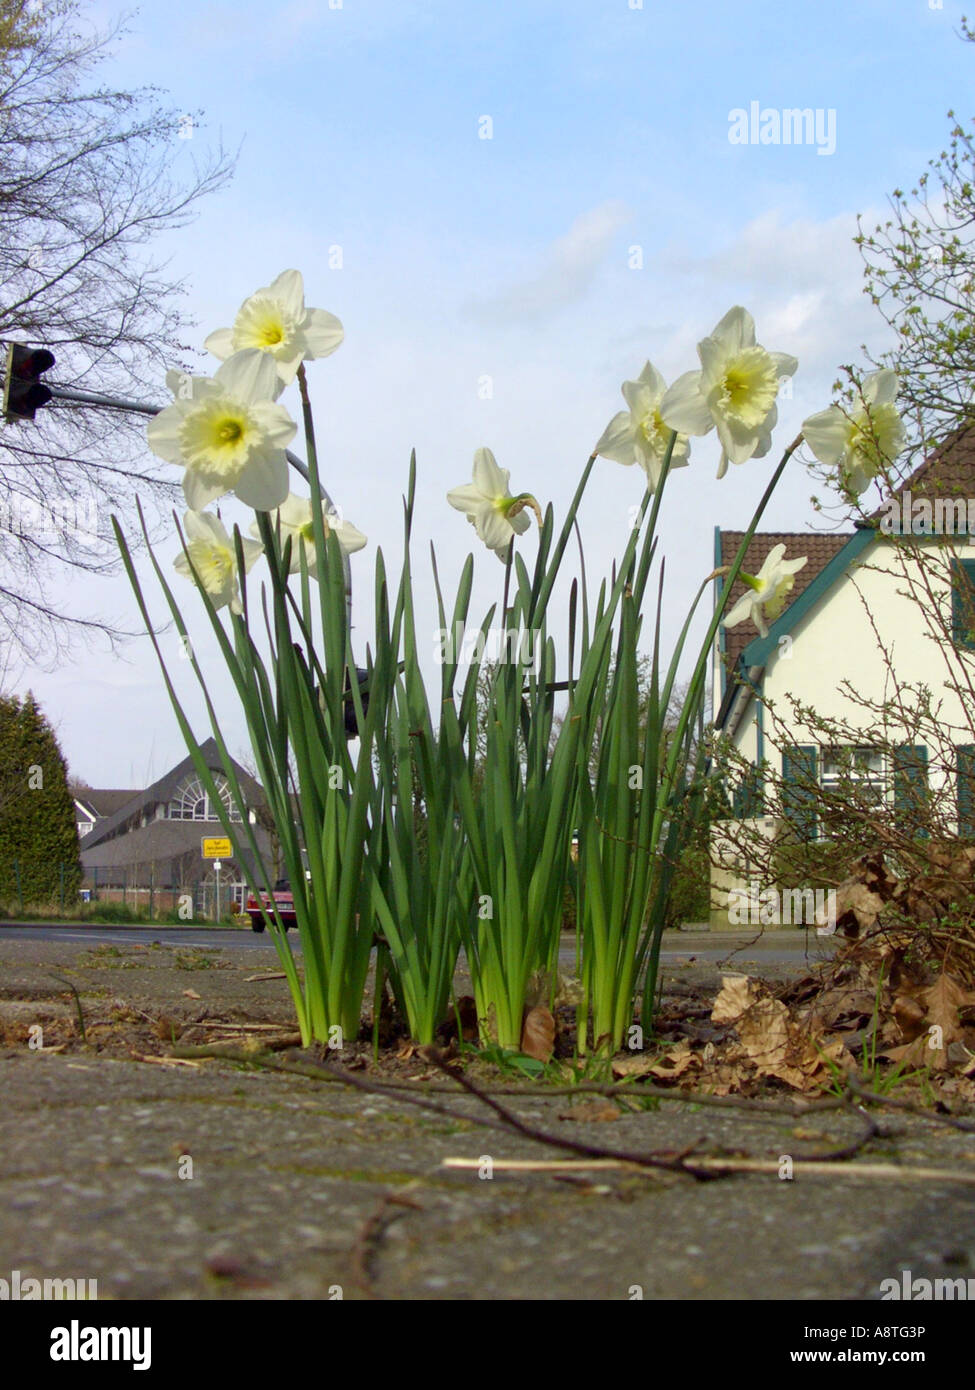 daffodil (Narcissus x incomparabilis, Narcissus incomparabilis (N. poeticus x pseudonarcissus)), blooming in a flowerbed at a s Stock Photo